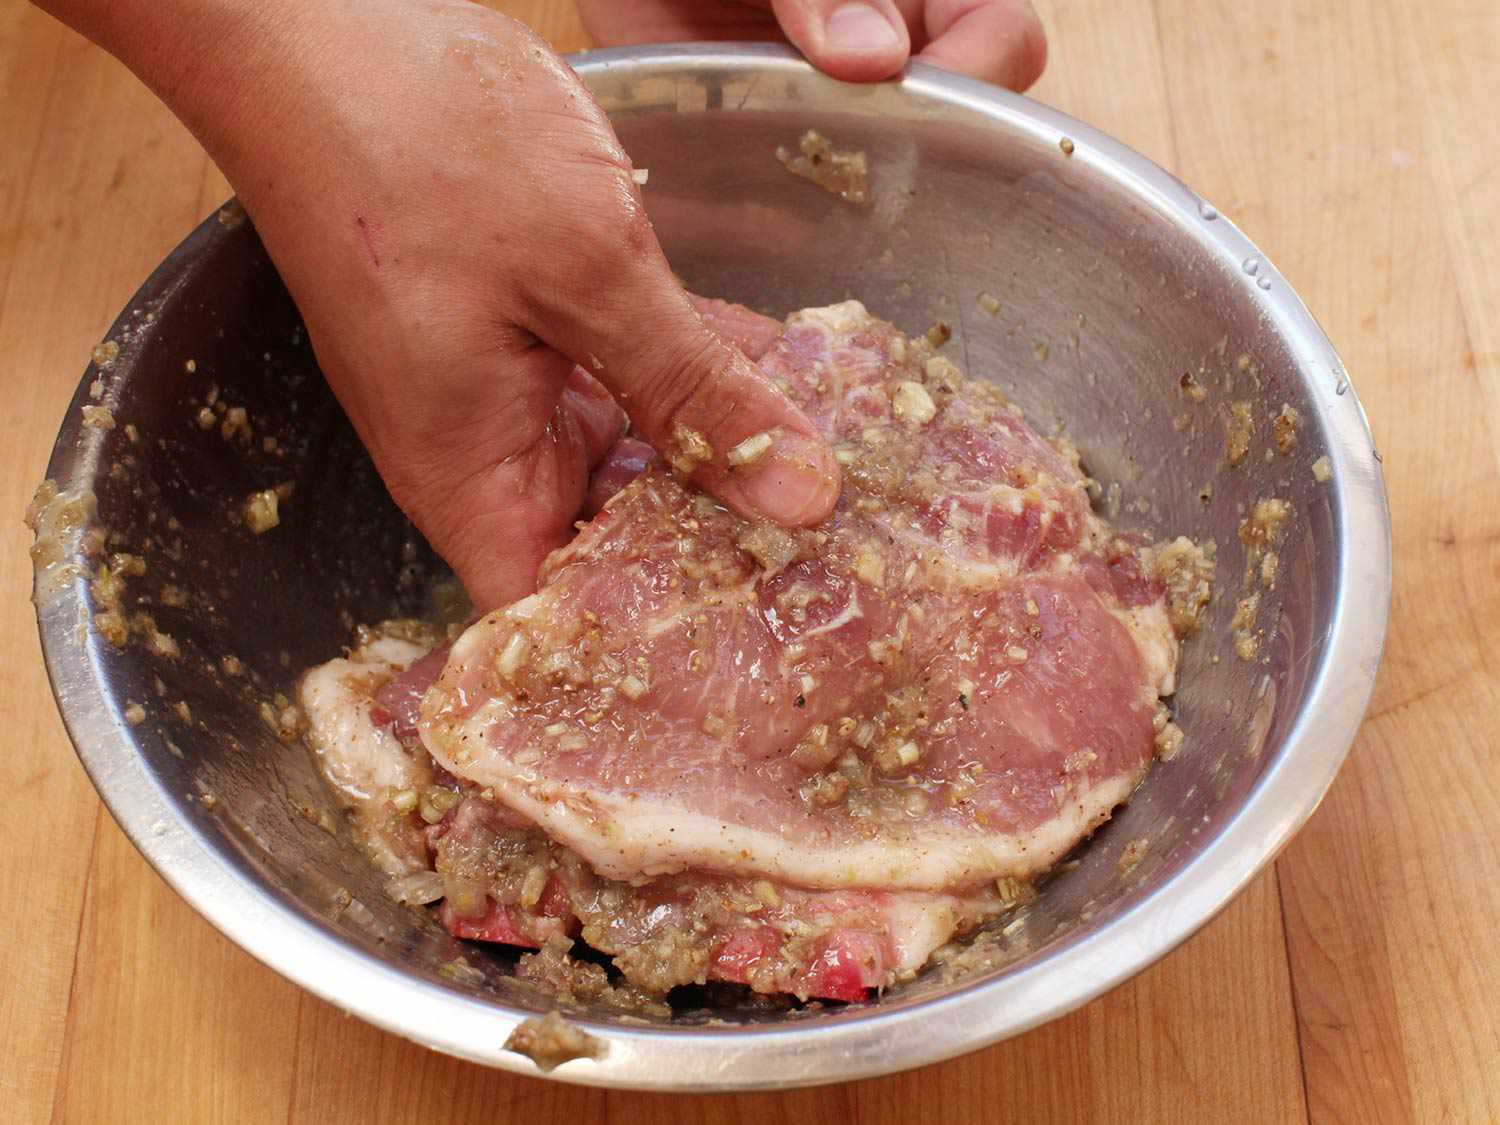 Adding thinly sliced pork chops to marinade in metal bowl for Vietnamese lemongrass grilled pork chops.